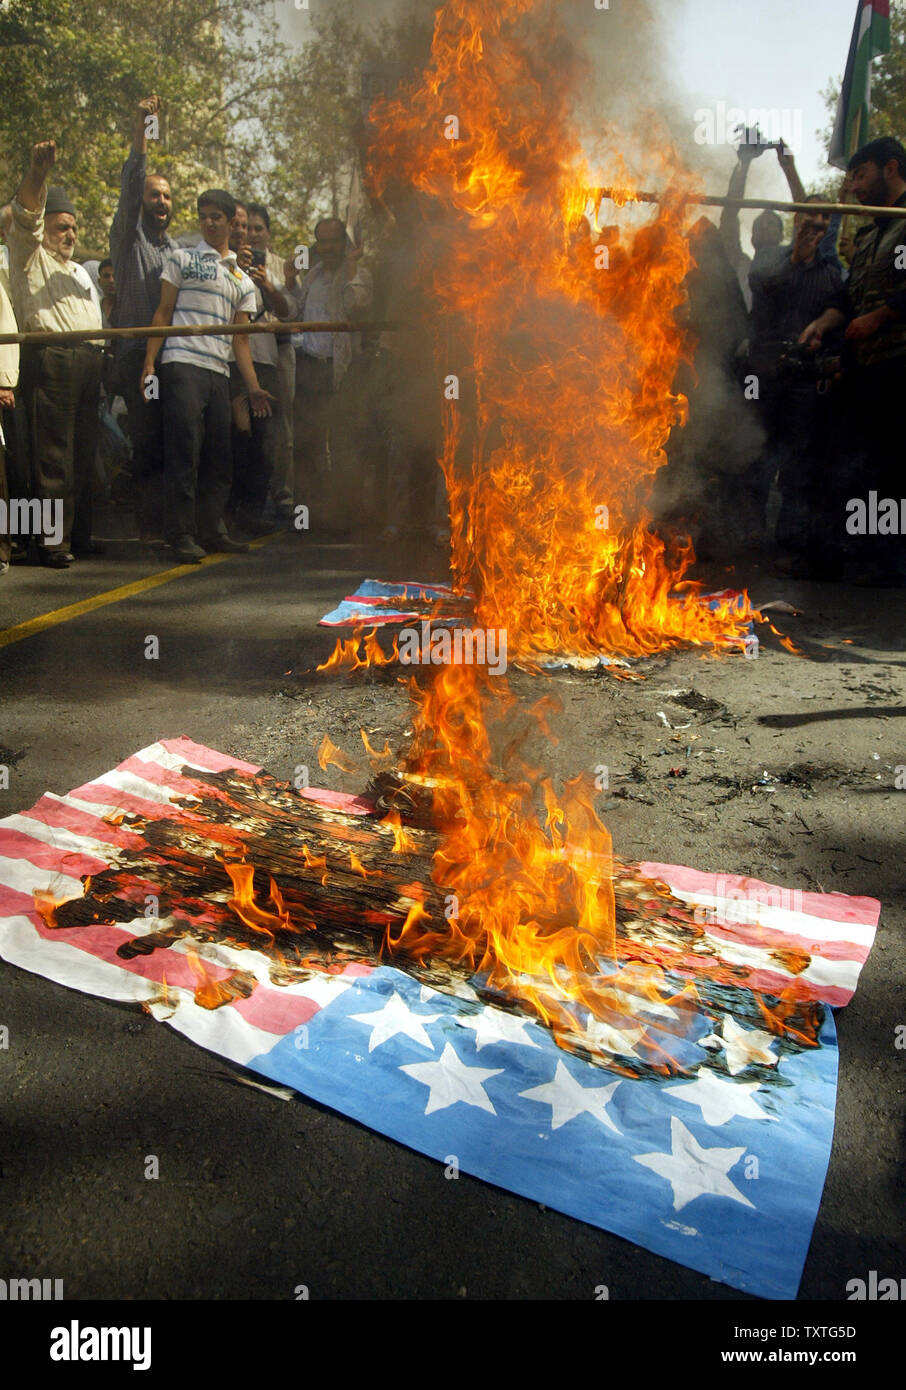 Iranians burn U.S. and British flags as they attend a rally on Al-Quds day (Jerusalem Day) in Tehran, Iran on September 27, 2008.  Jerusalem Day, an annual day of protest decreed in 1979 by the Iran's late revolutionary founder Ayatollah Ruhollah Khomeini , saw people across the Middle East demand that the holy city be returned to Palestinian control. (UPI Photo/Mohammad Kheirkhah) Stock Photo